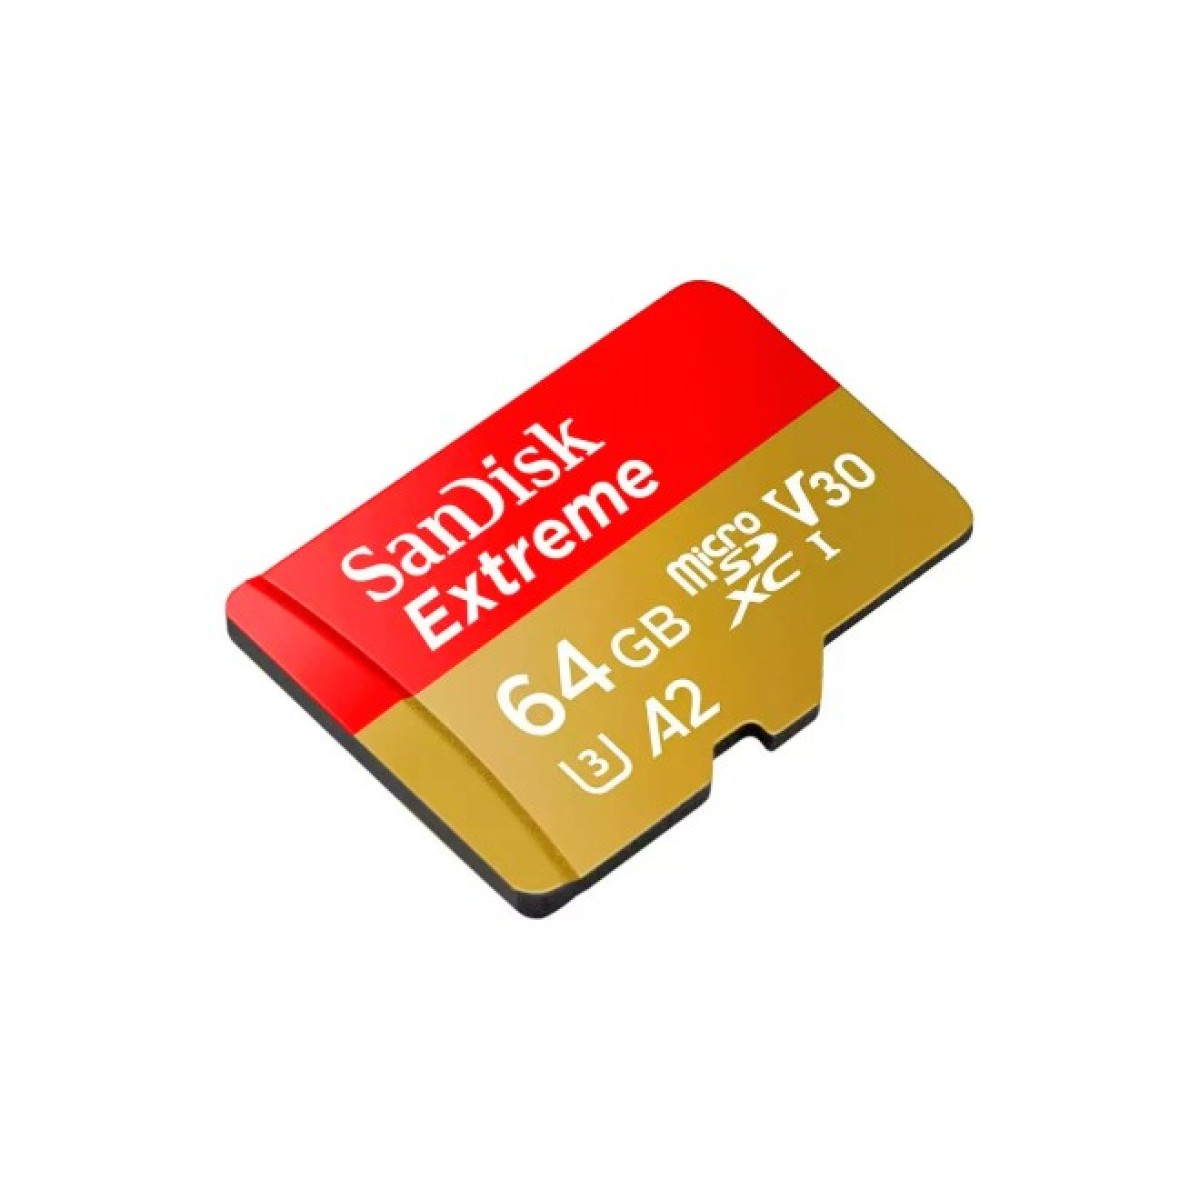 Карта пам'яті SanDisk 64GB microSD class 10 UHS-I Extreme For Action Cams and Dro (SDSQXAH-064G-GN6AA) 98_98.jpg - фото 2